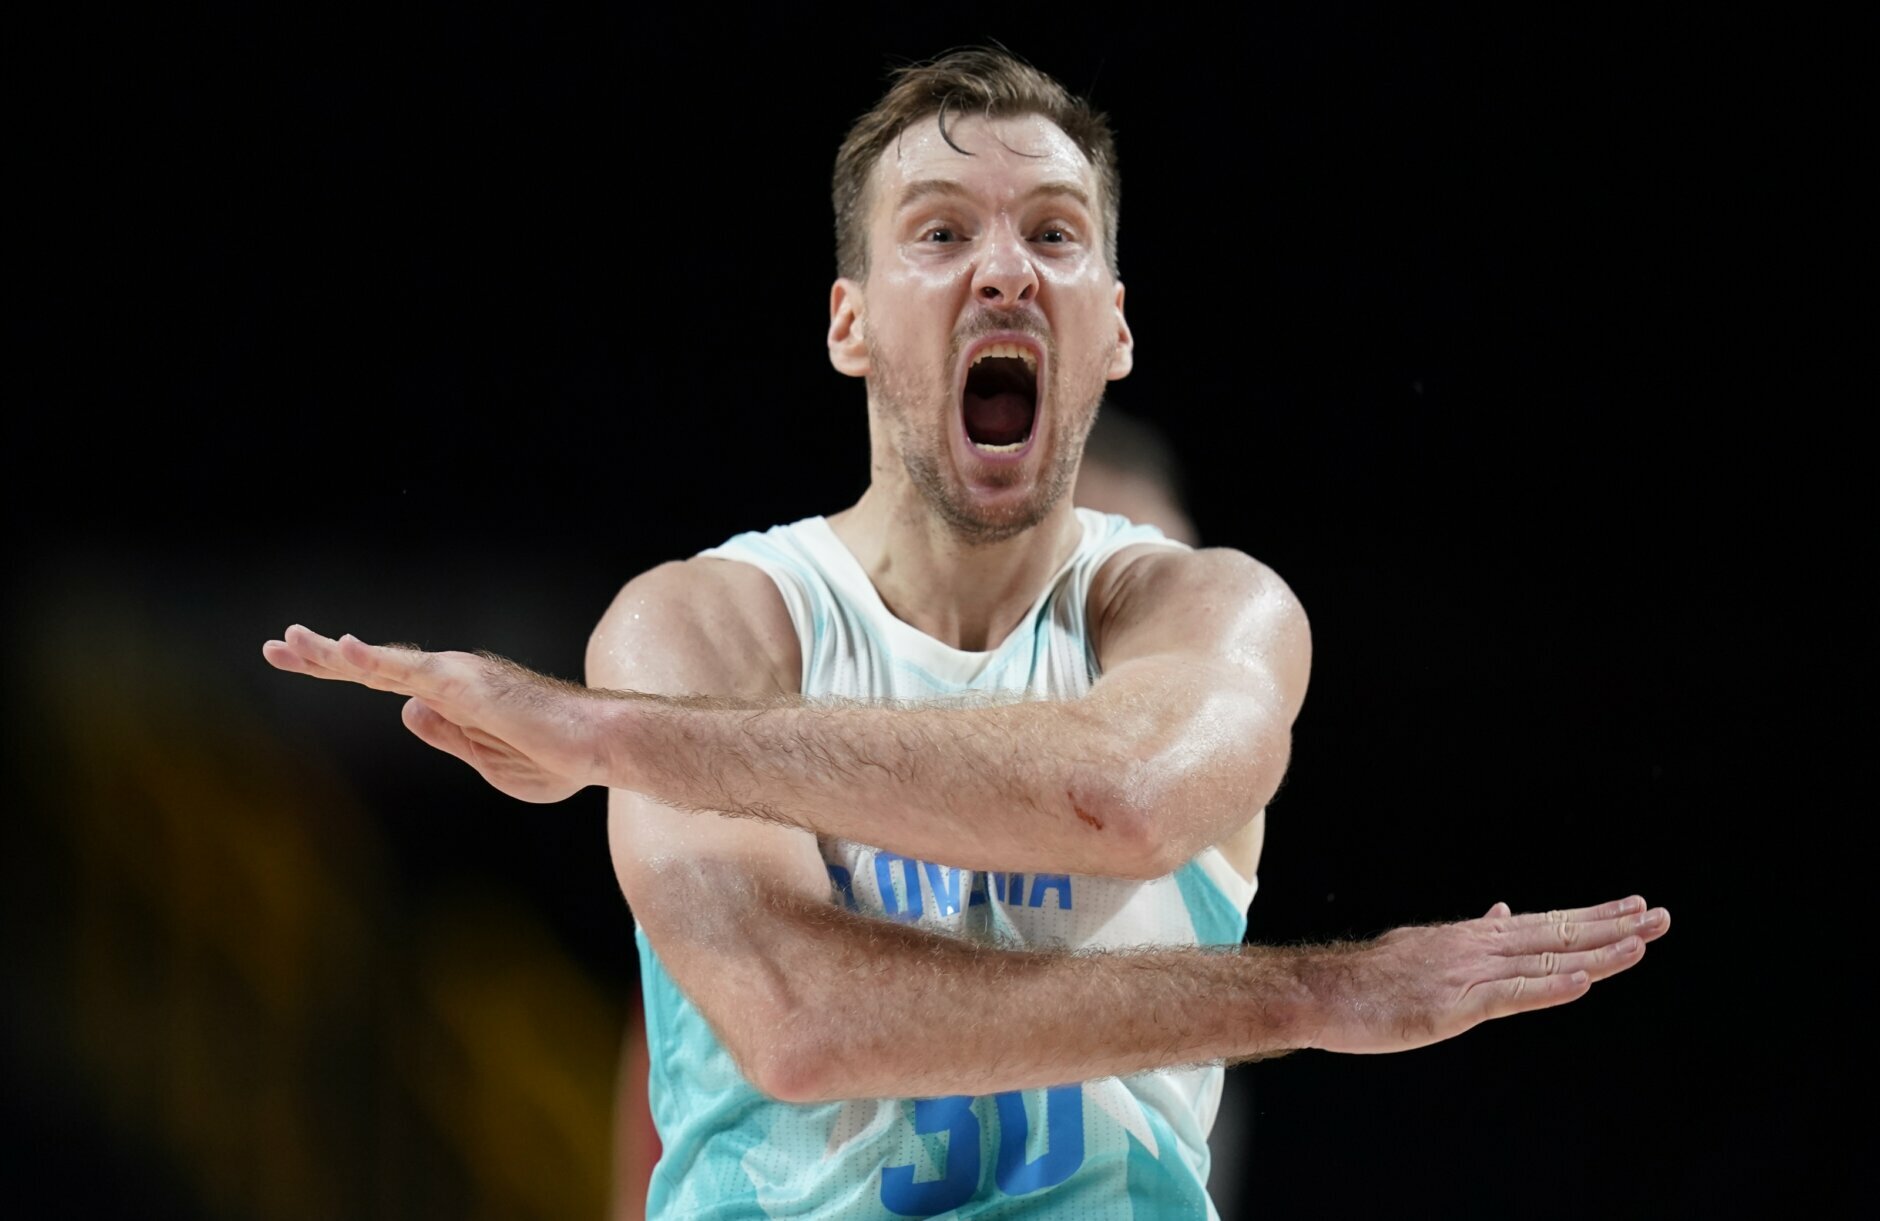 Slovenia's Zoran Dragic (30) celebrates after making a three point basket during men's basketball quarterfinal game against Germany at the 2020 Summer Olympics, Tuesday, Aug. 3, 2021, in Saitama, Japan. (AP Photo/Charlie Neibergall)